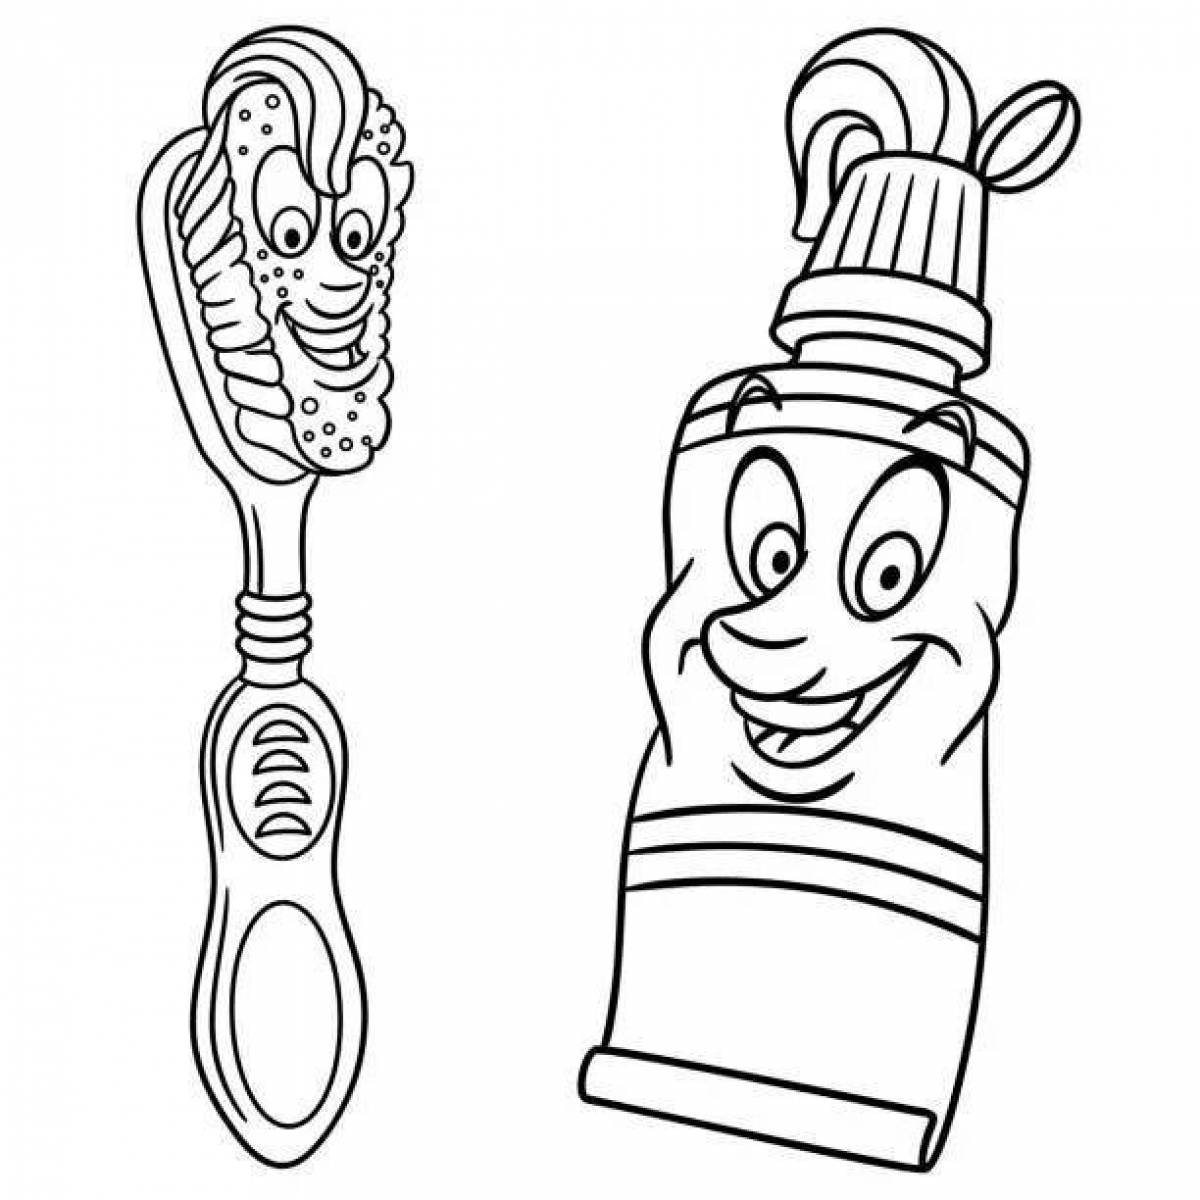 Attractive toothbrush and paste coloring page